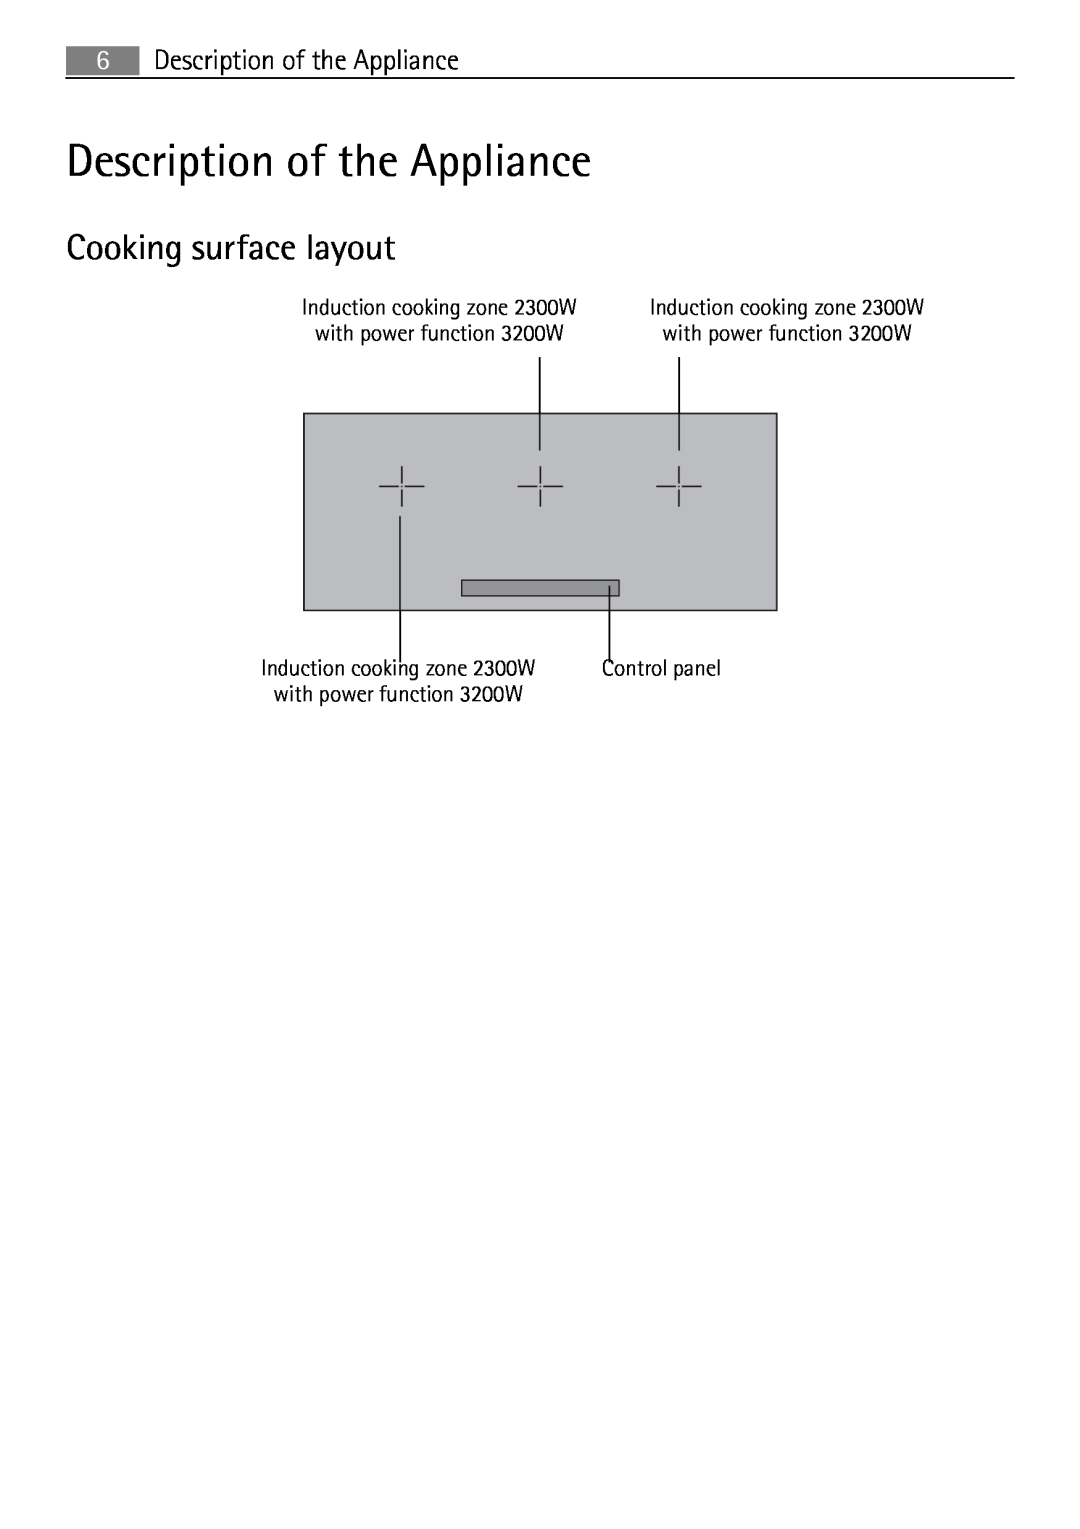 Electrolux 98001 KF SN Description of the Appliance, Cooking surface layout, Control panel, with power function 3200W 